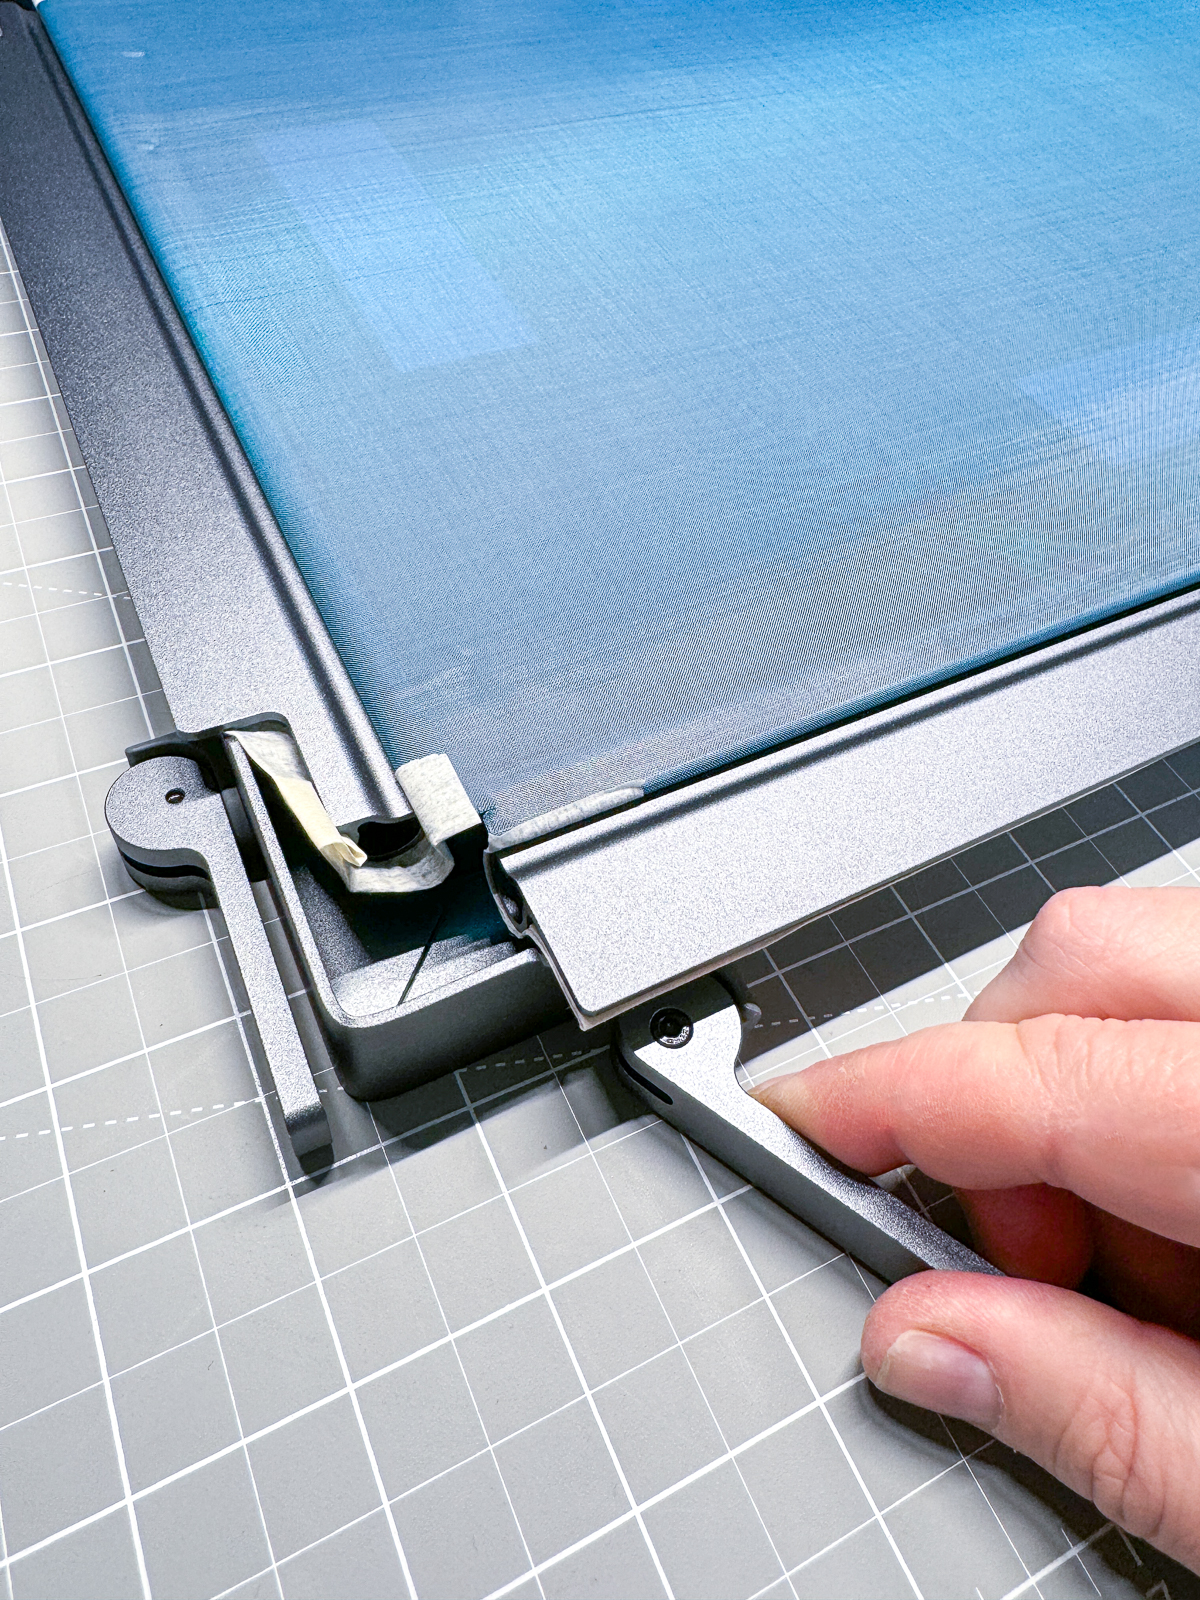 closing the latches on the screen printing frame